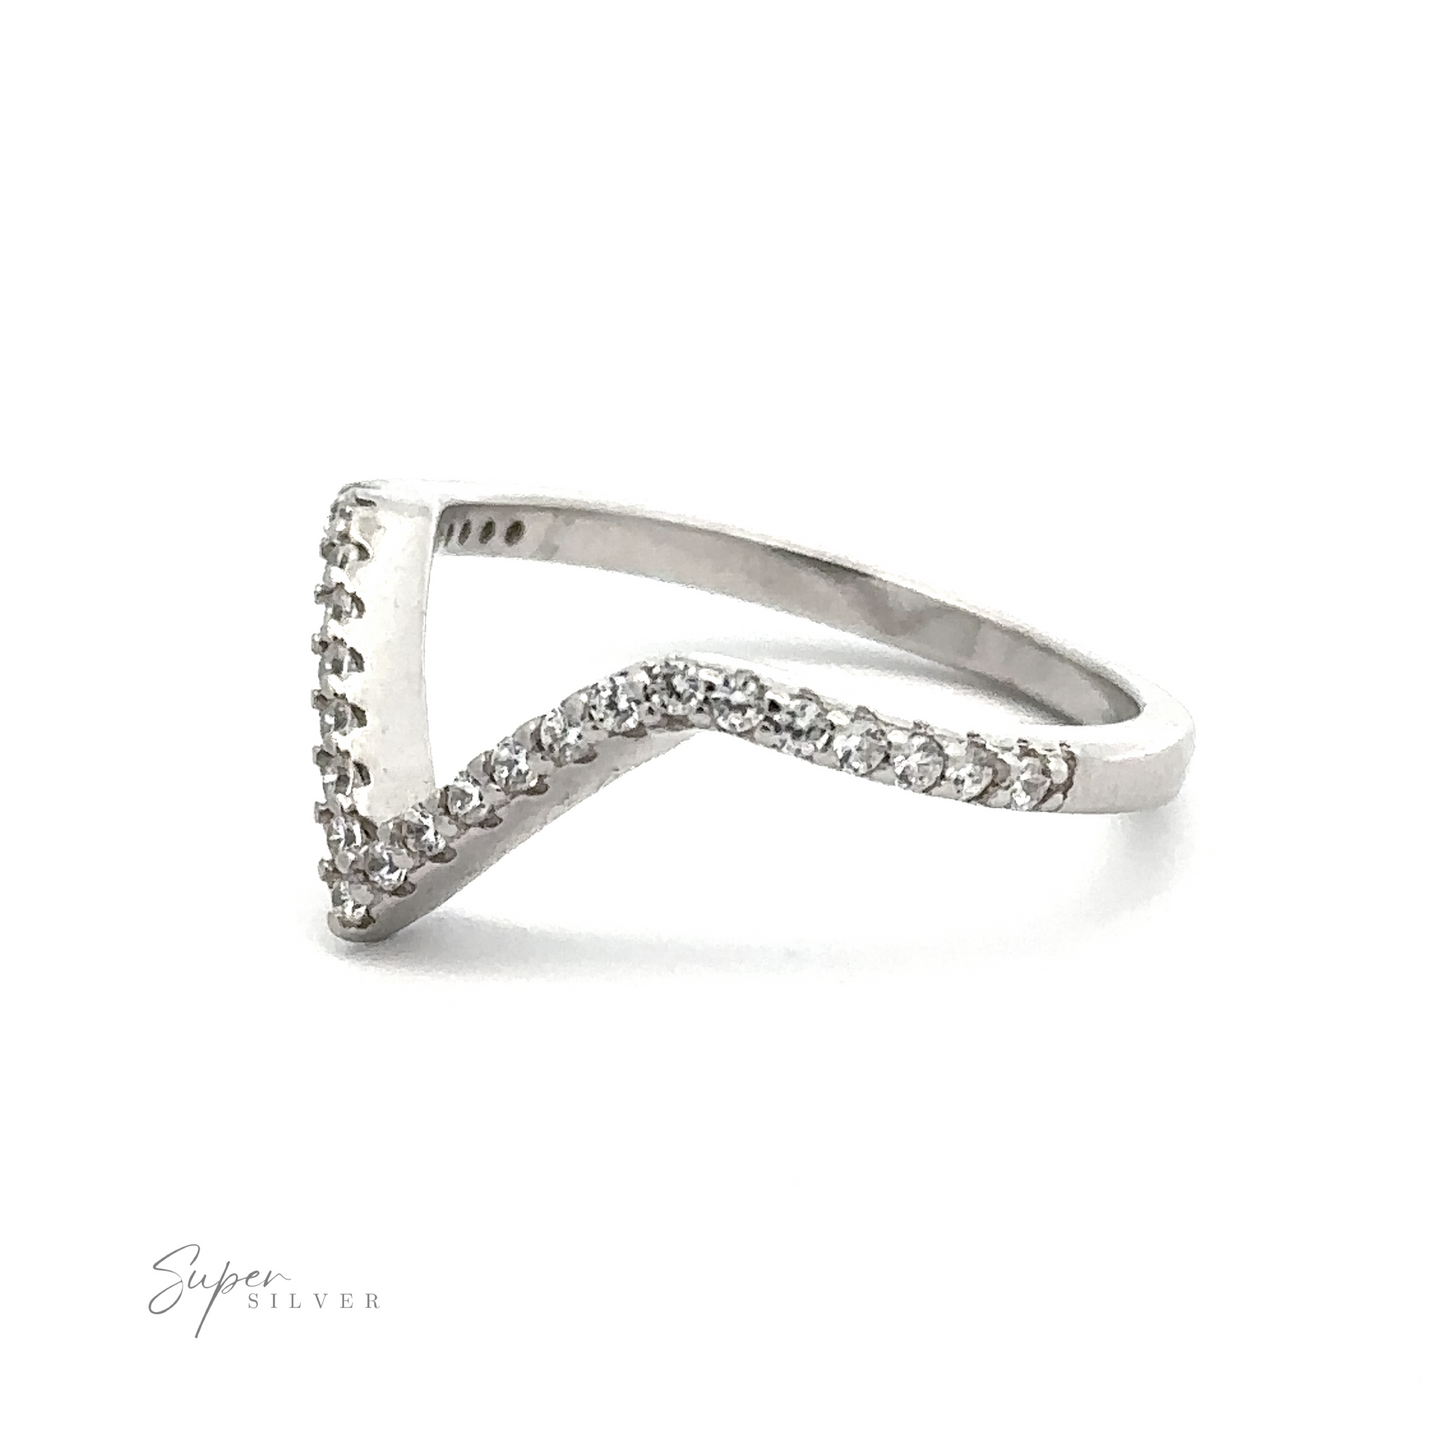 
                  
                    A Pave Set Cubic Zirconia Chevron Ring featuring a chevron design adorned with small diamonds along the upper edge. The ring is displayed on a white background with the text "Super Silver" in the bottom left corner.
                  
                